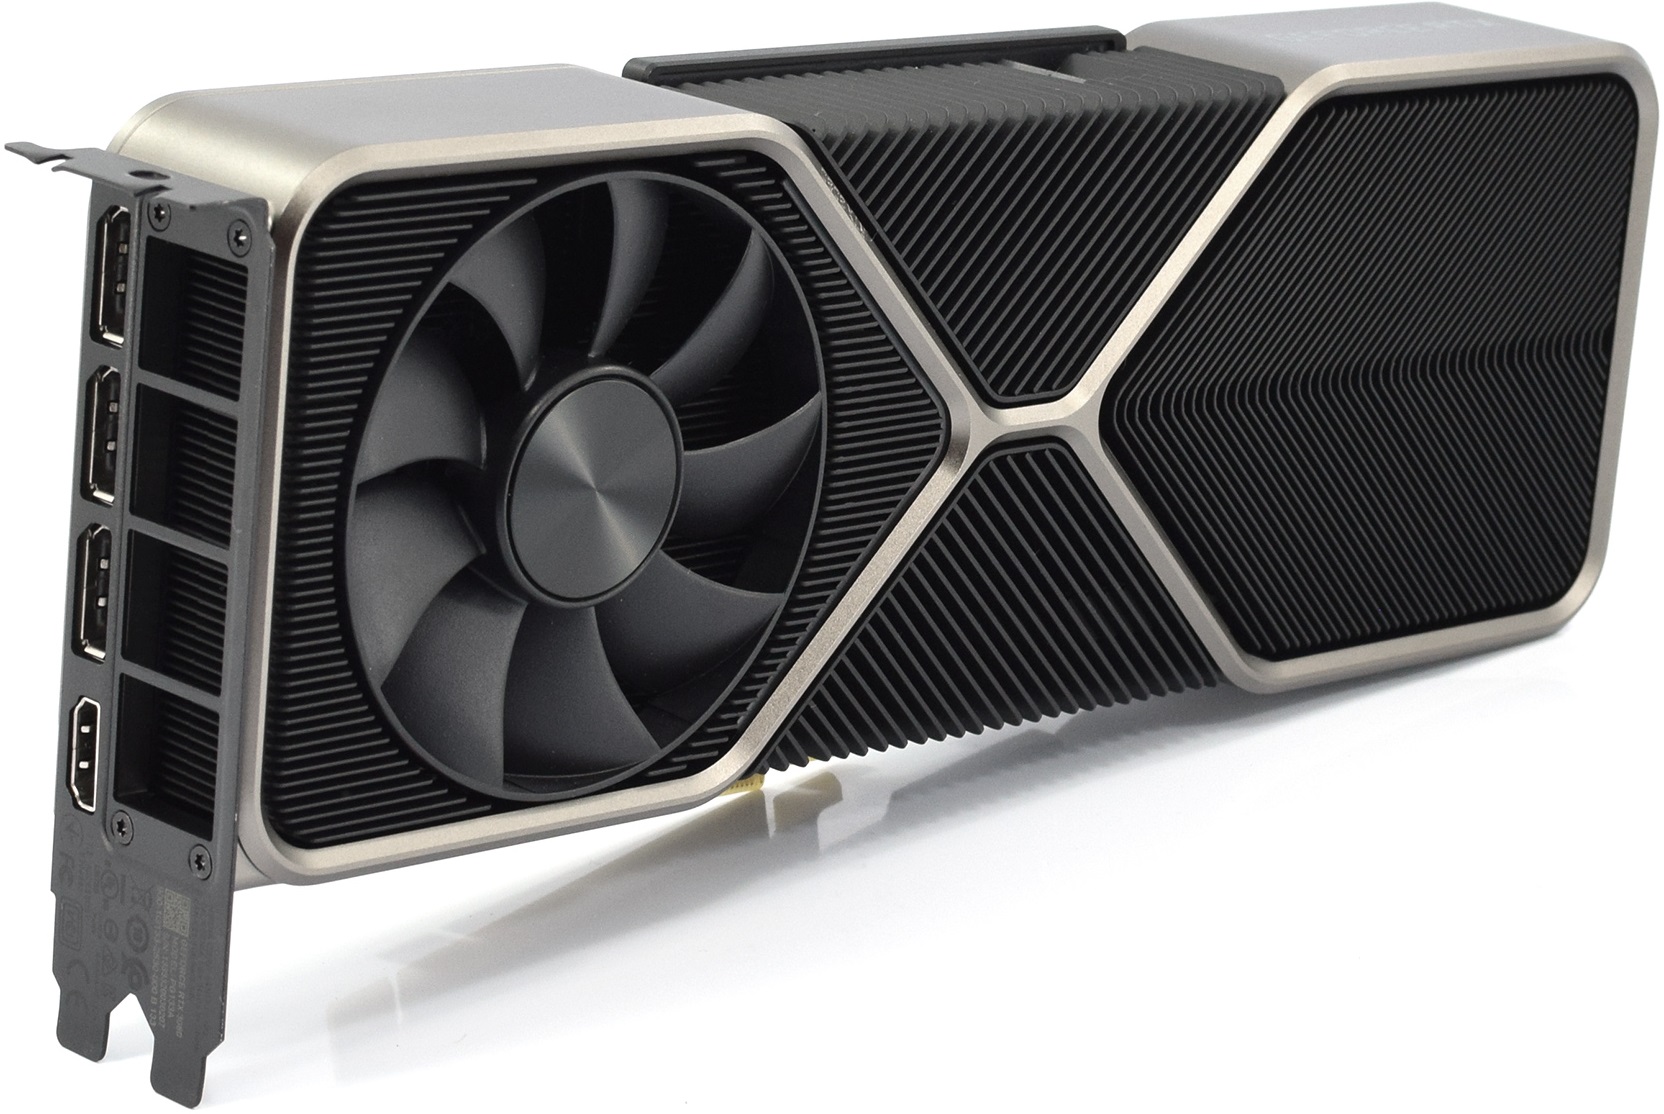 Nvidia ready to announce GeForce RTX 3080 Ti and GeForce RTX 3070 Ti ...